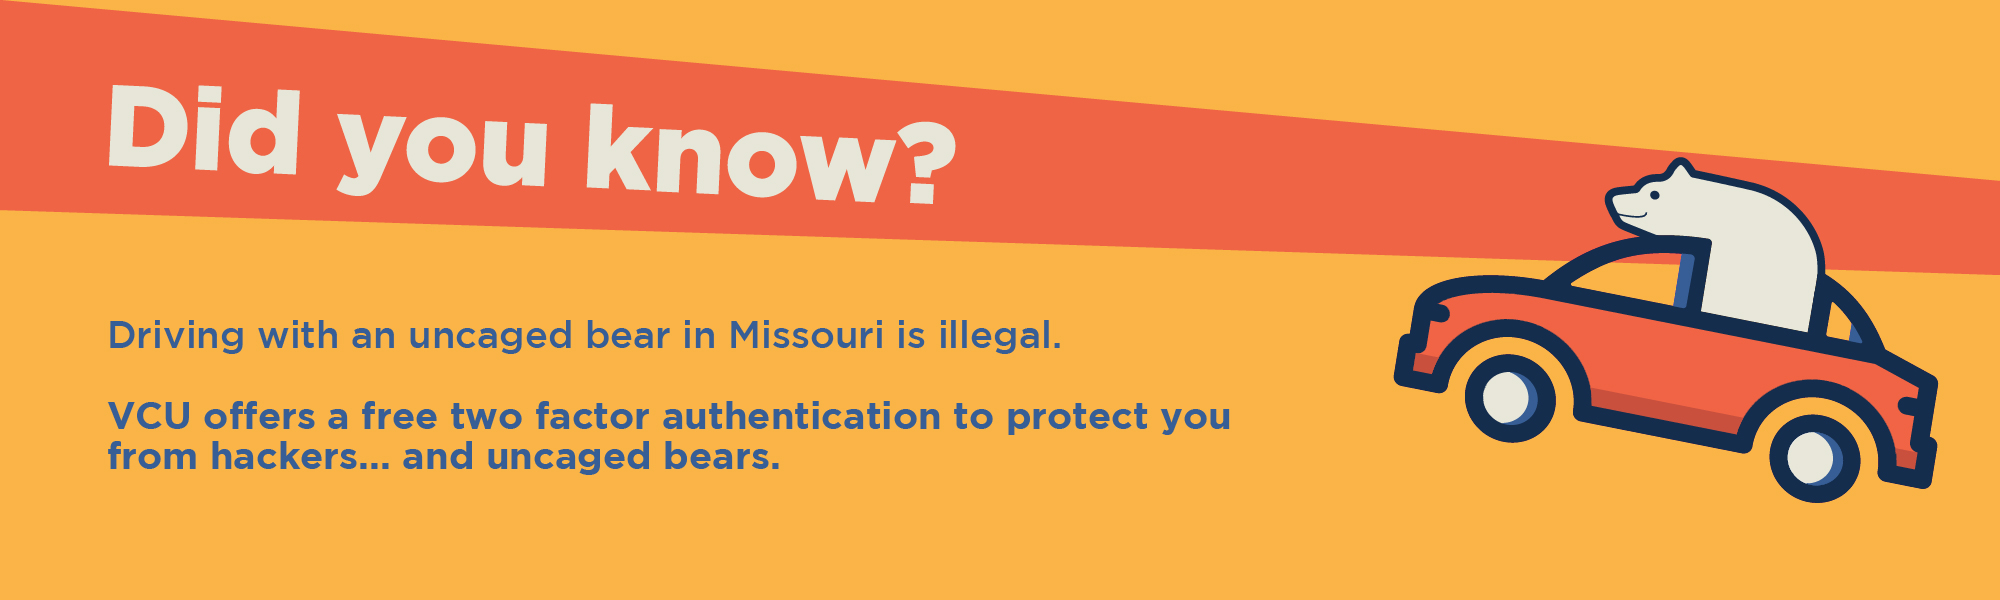 Did you know? Driving with an uncaged bear in Missouri is illegal. VCU offers a free two factor authenication to protect you from hackers... and uncaged bears.